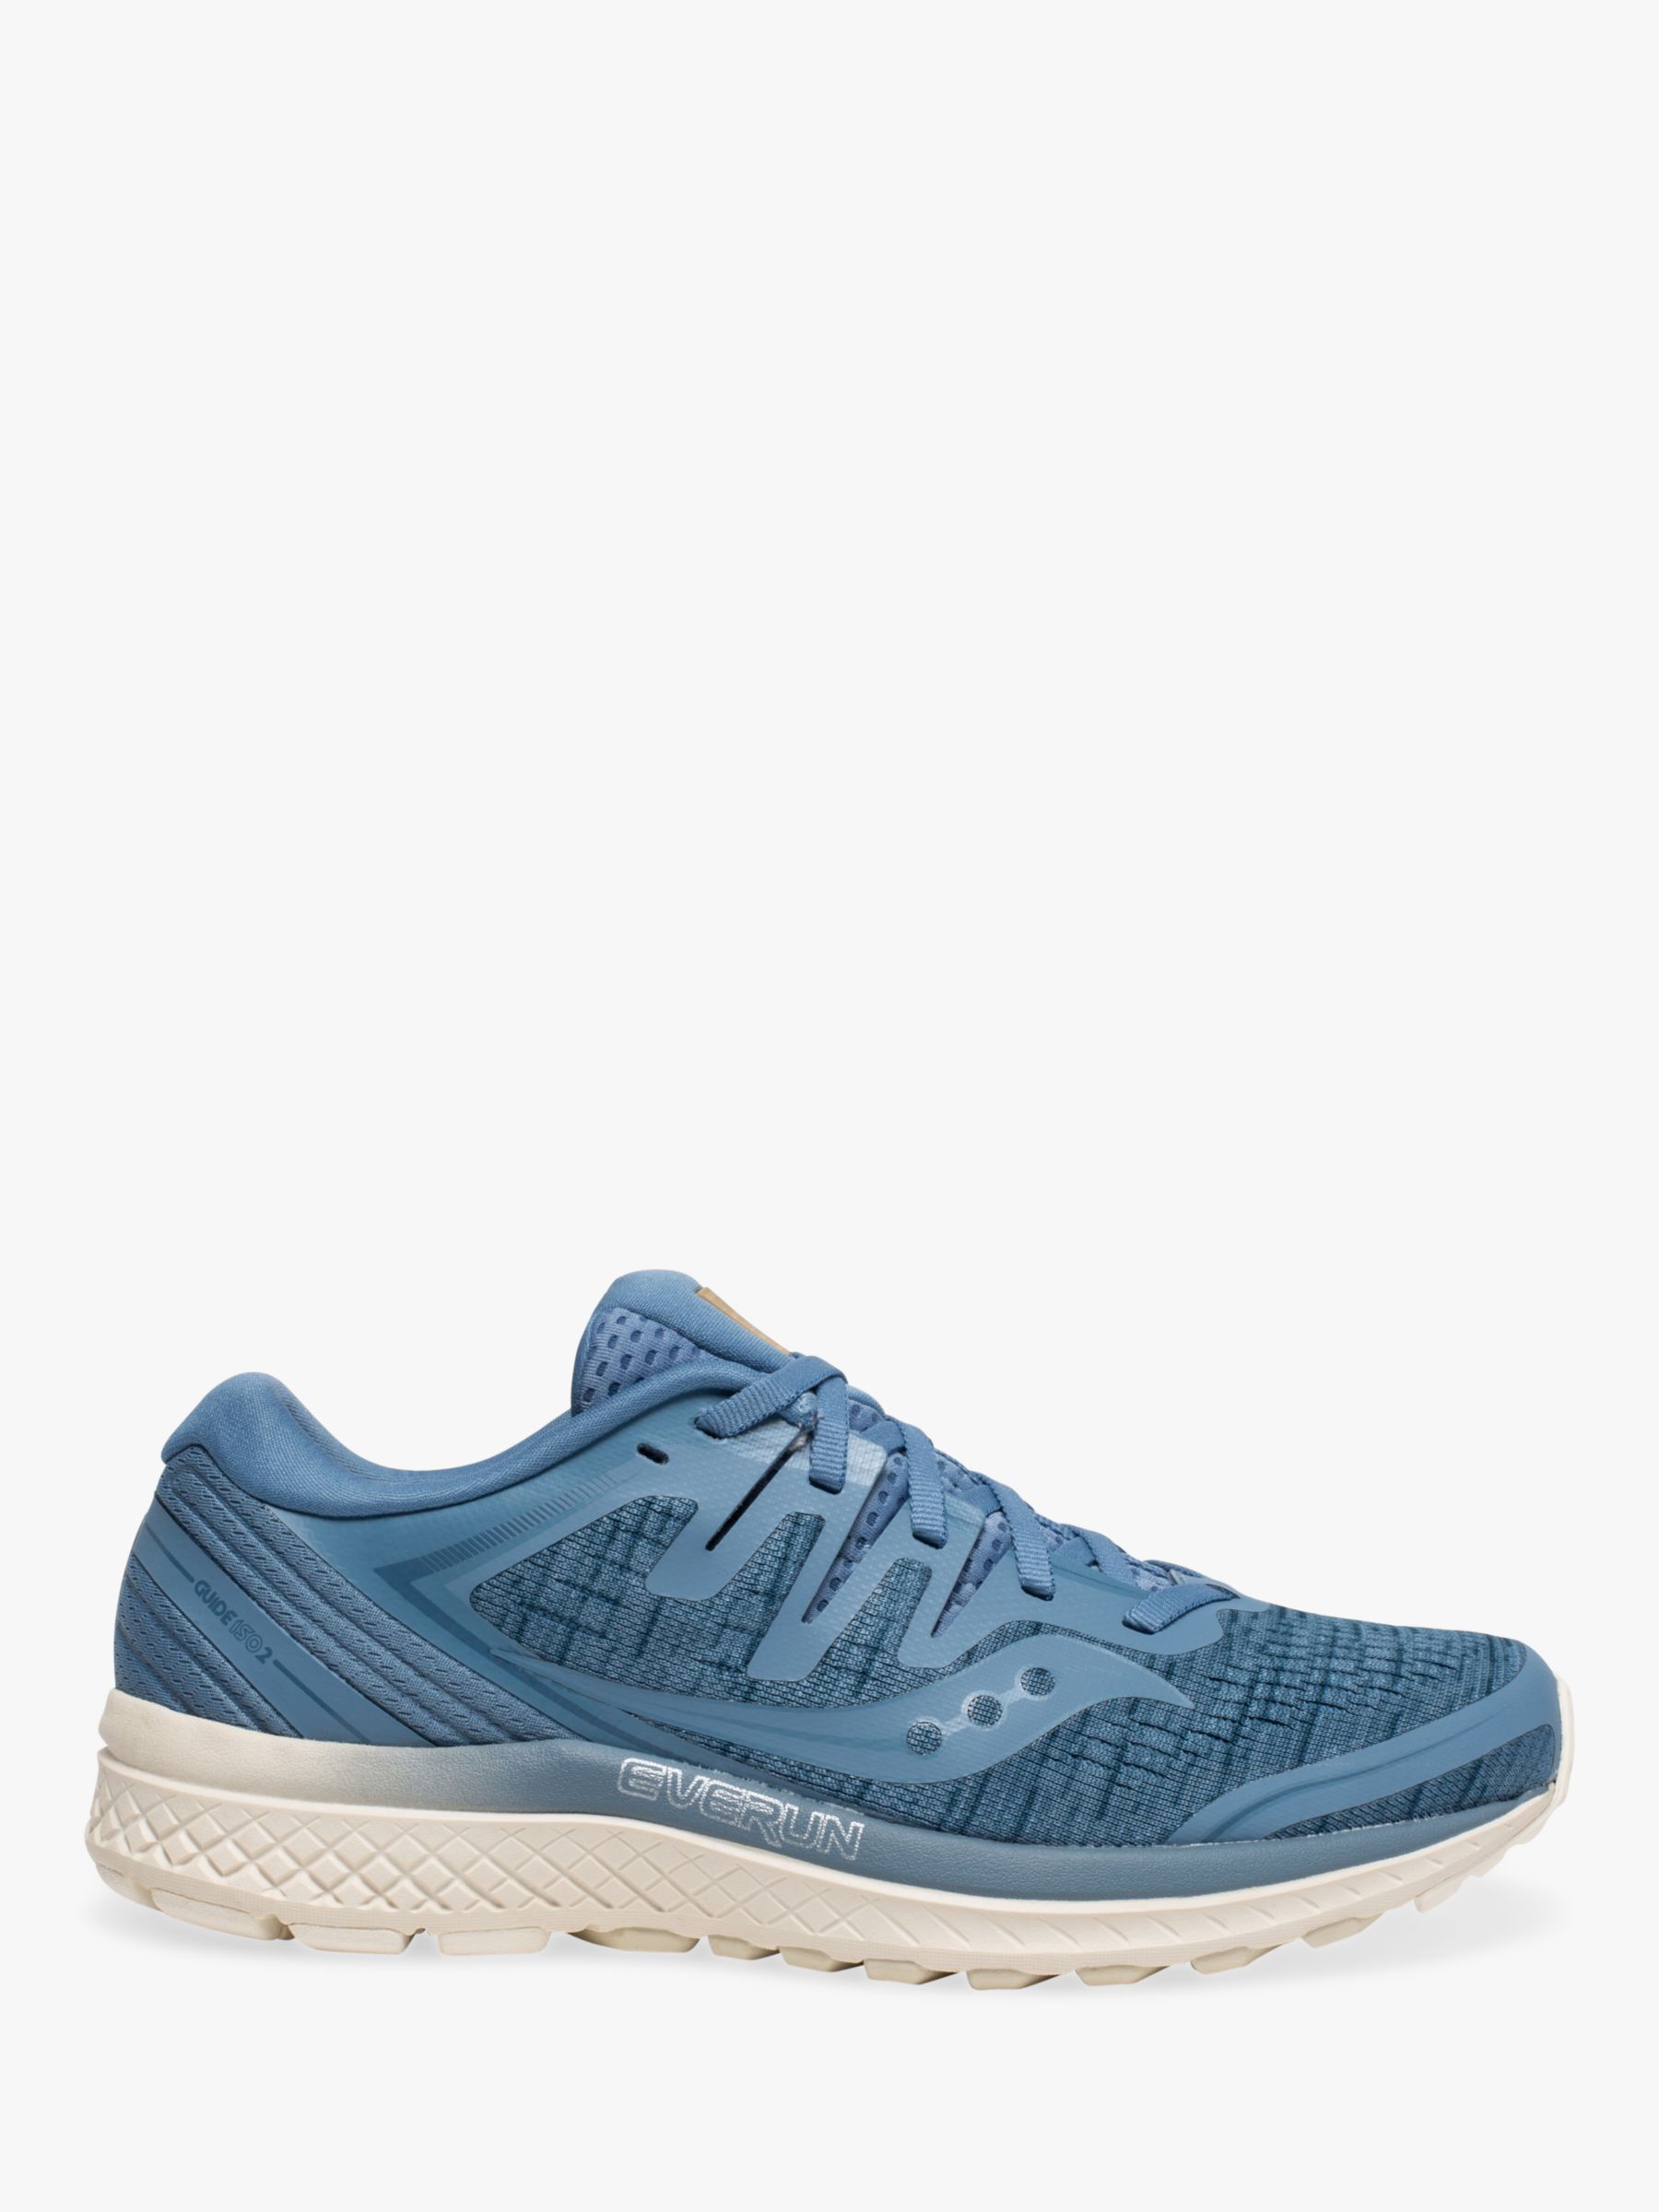 saucony guide iso womens uk